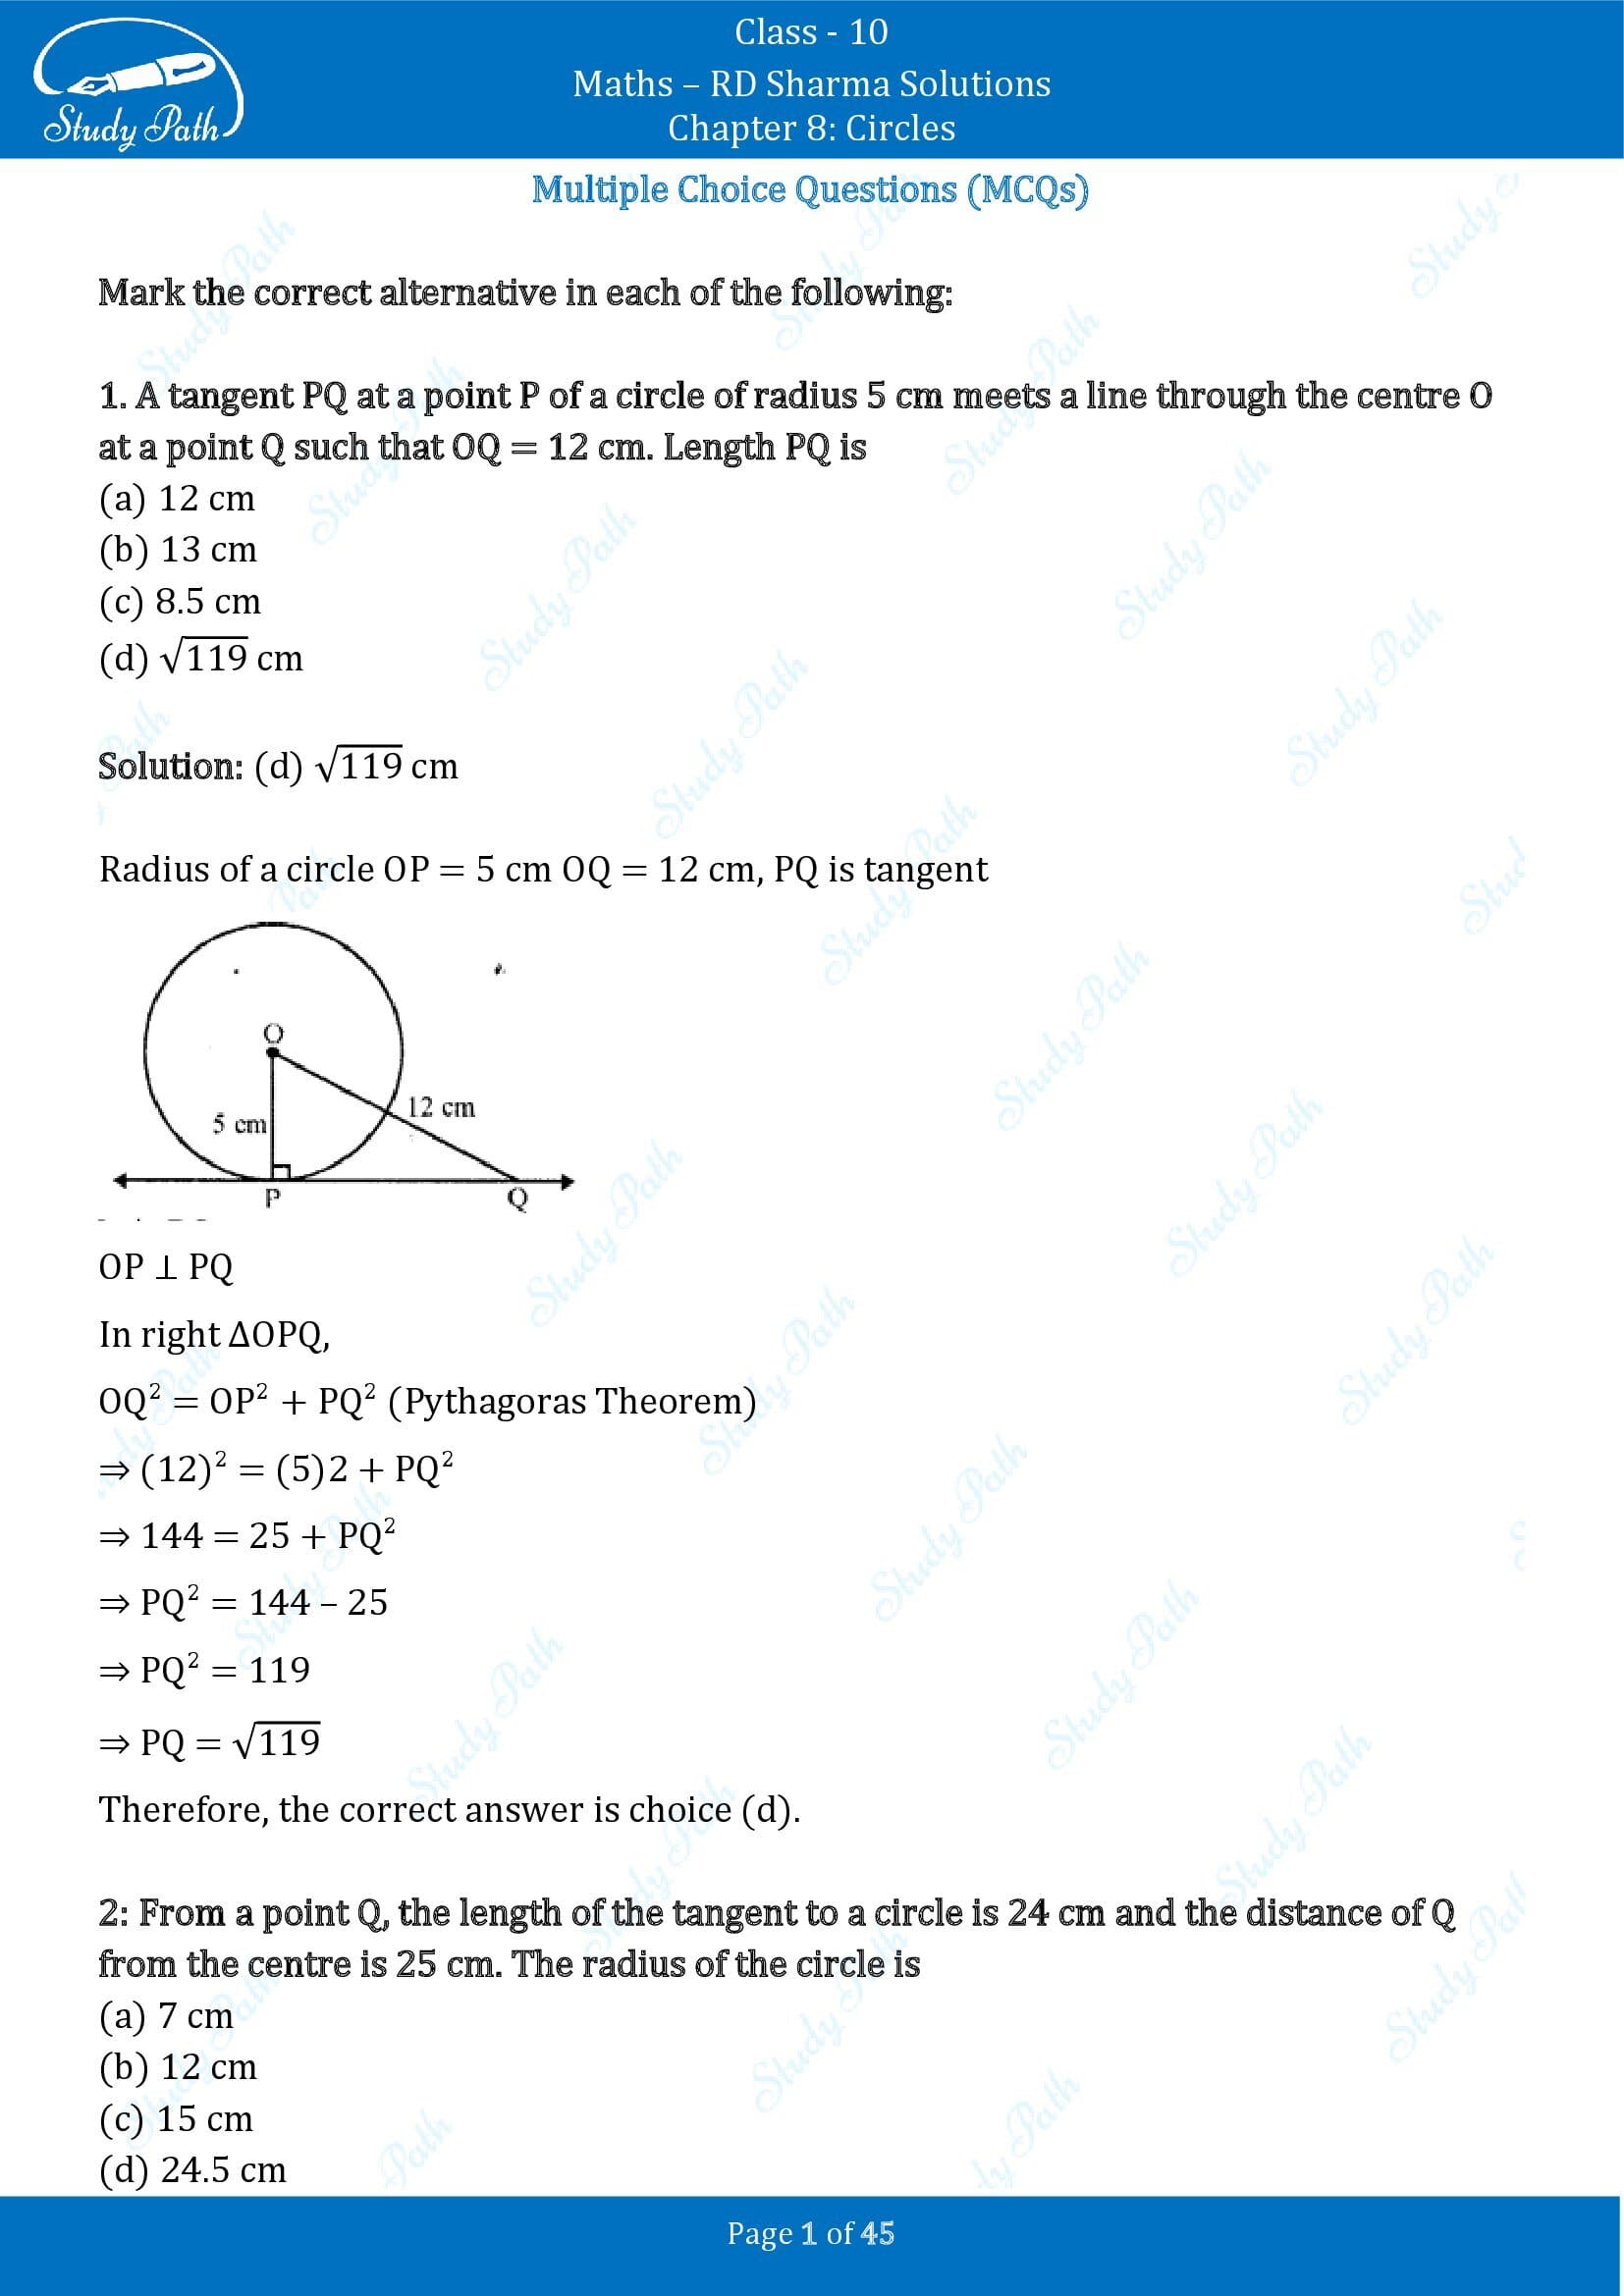 RD Sharma Solutions Class 10 Chapter 8 Circles Multiple Choice Questions MCQs 00001